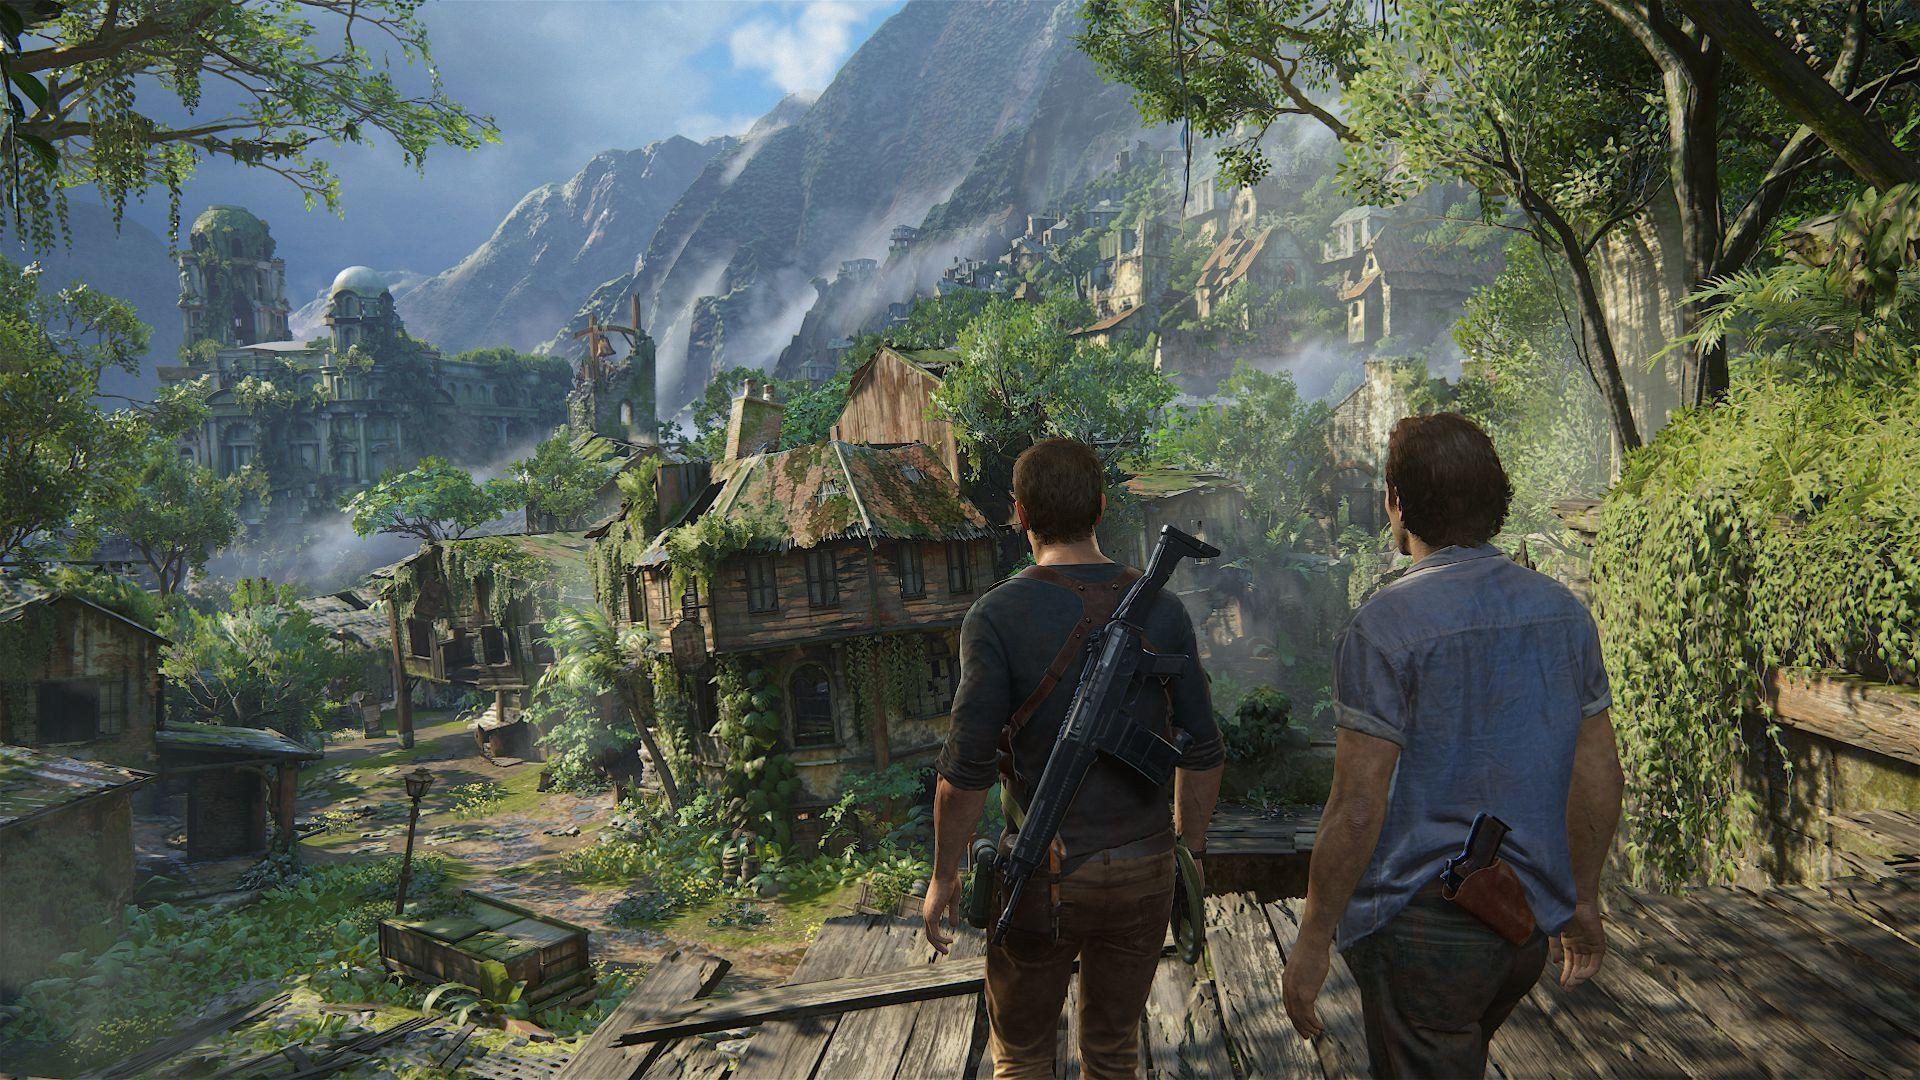 Uncharted 4: A Thief's End - Exploring The Limits Of The PS4